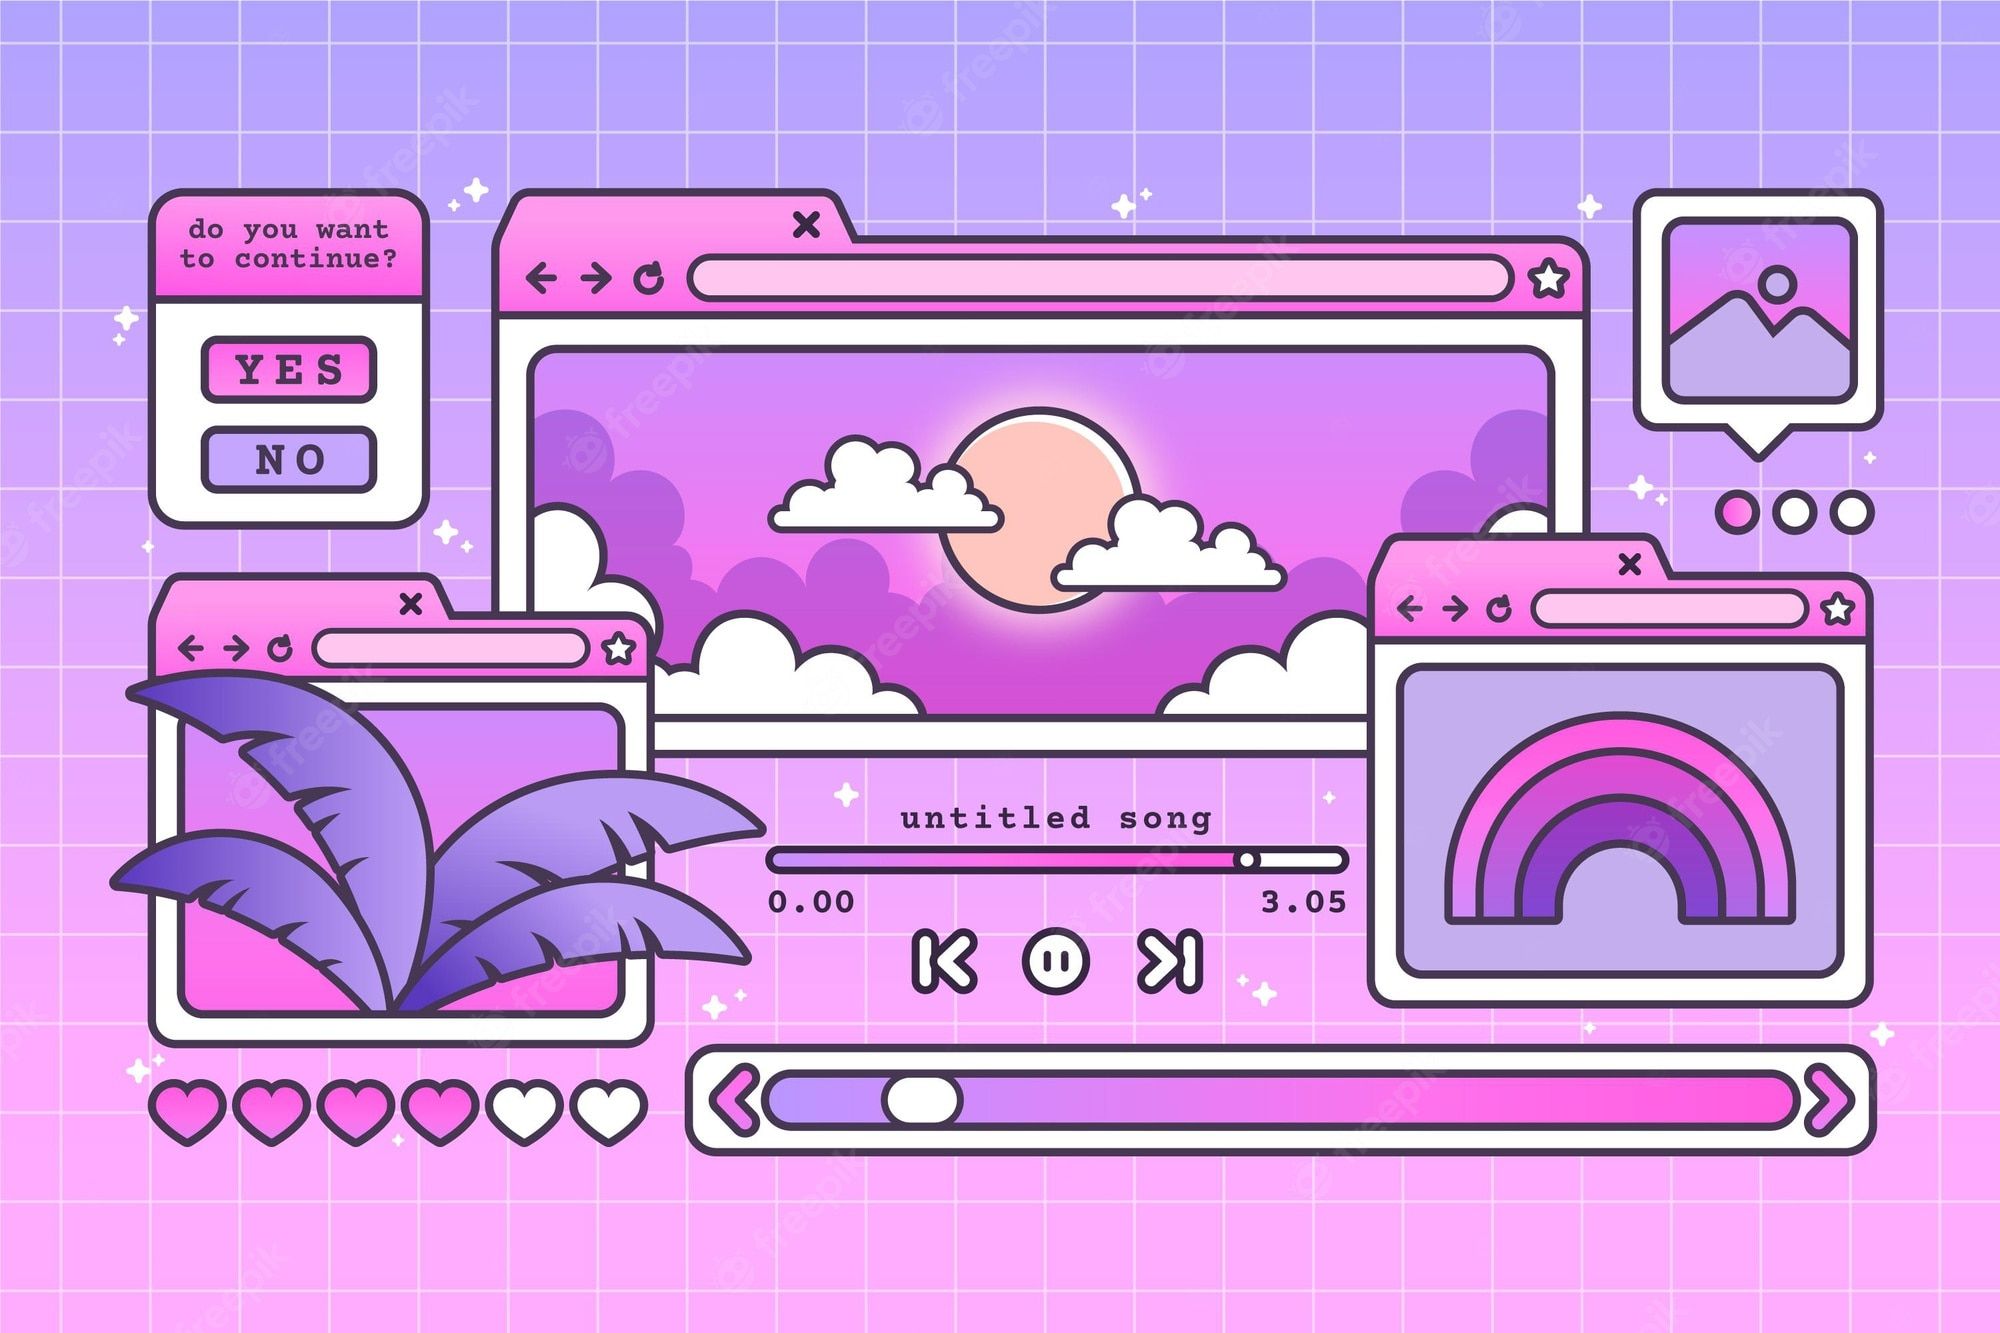 A set of pink and purple icons on the screen - Vaporwave, technology